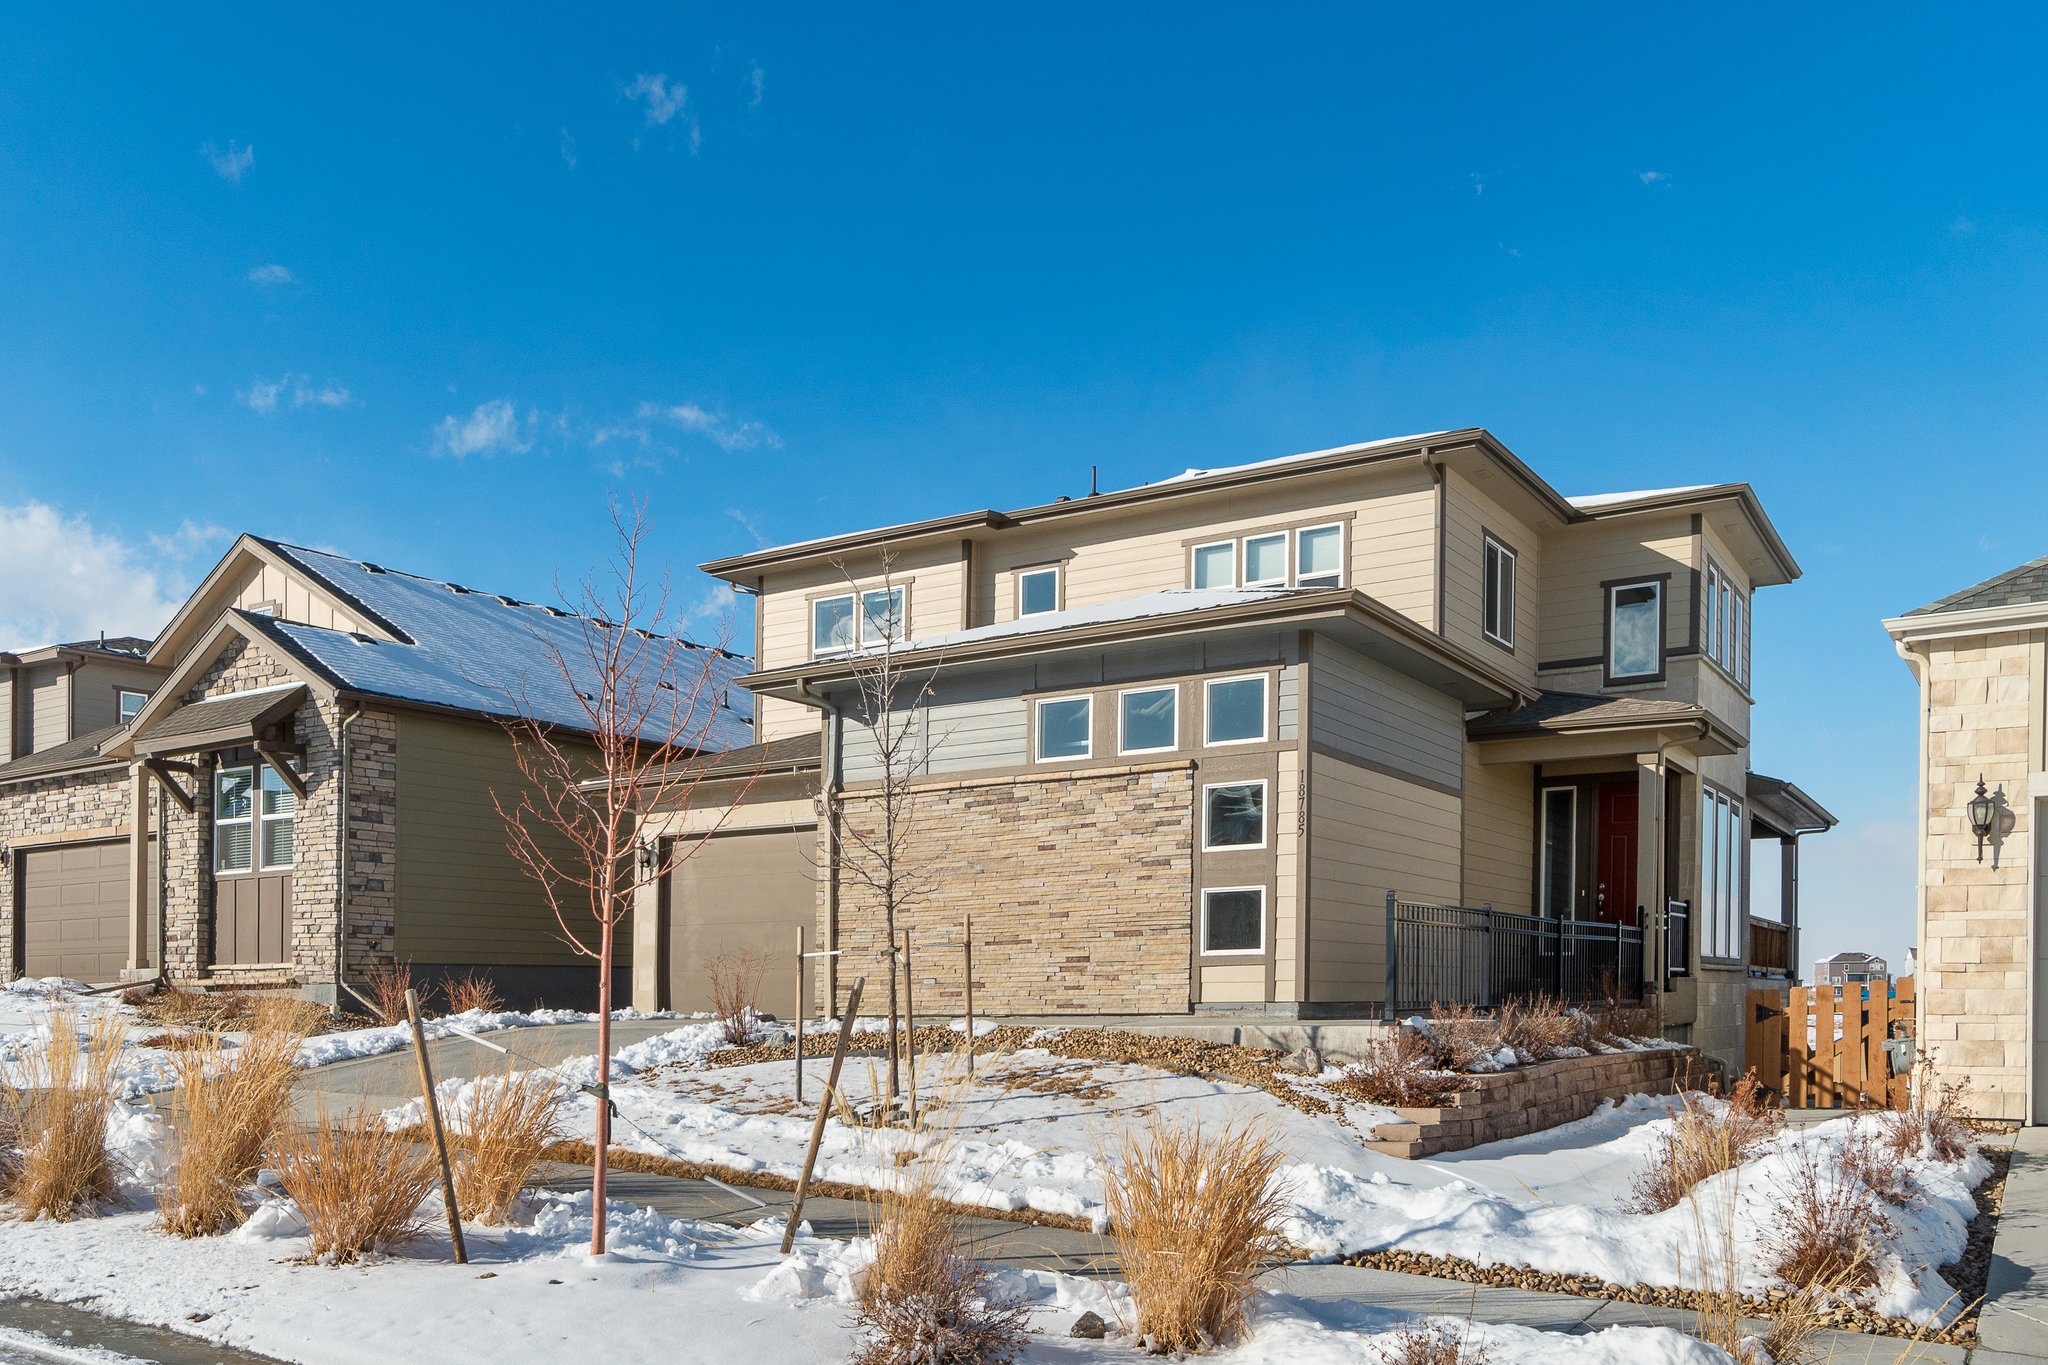 18785 W 93rd Ave, Arvada, CO 80007, US